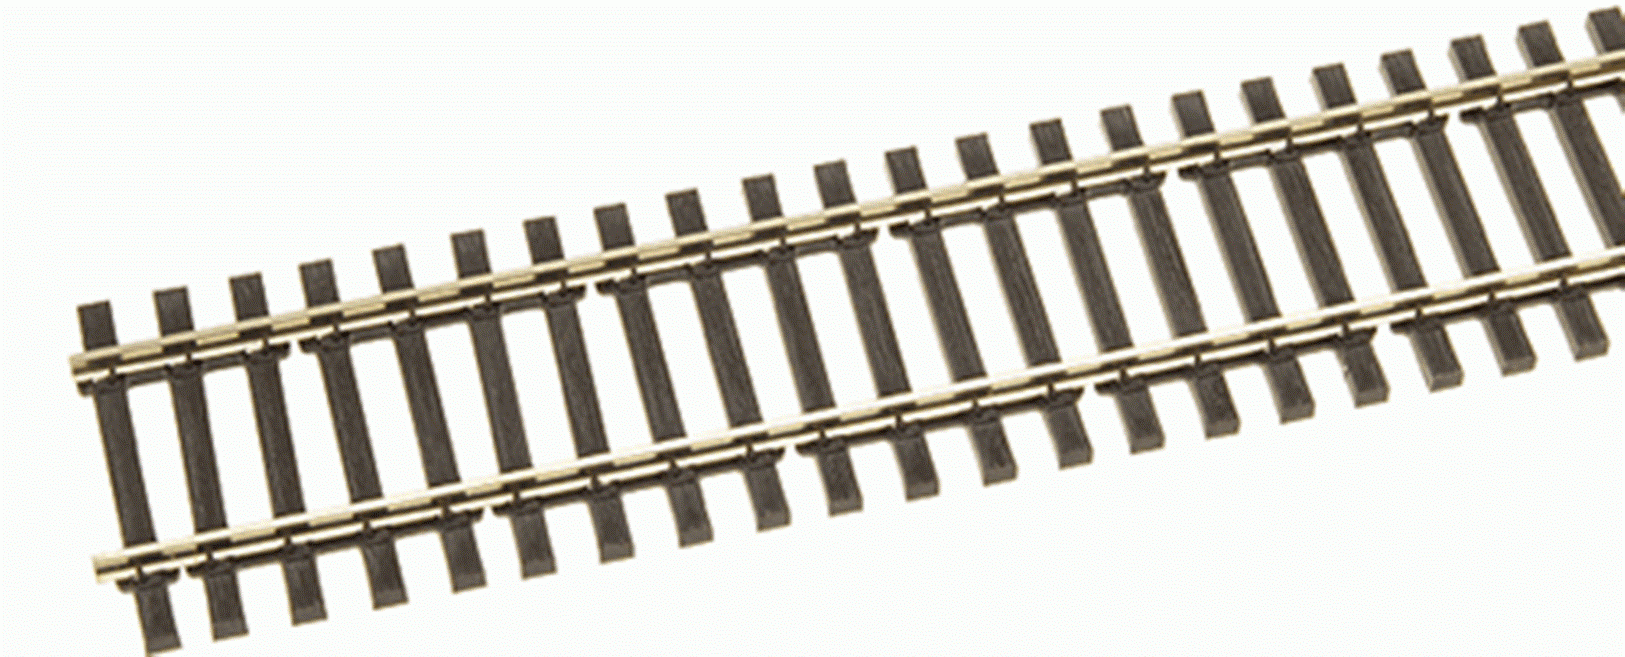 Ho Scale Track 20Cm